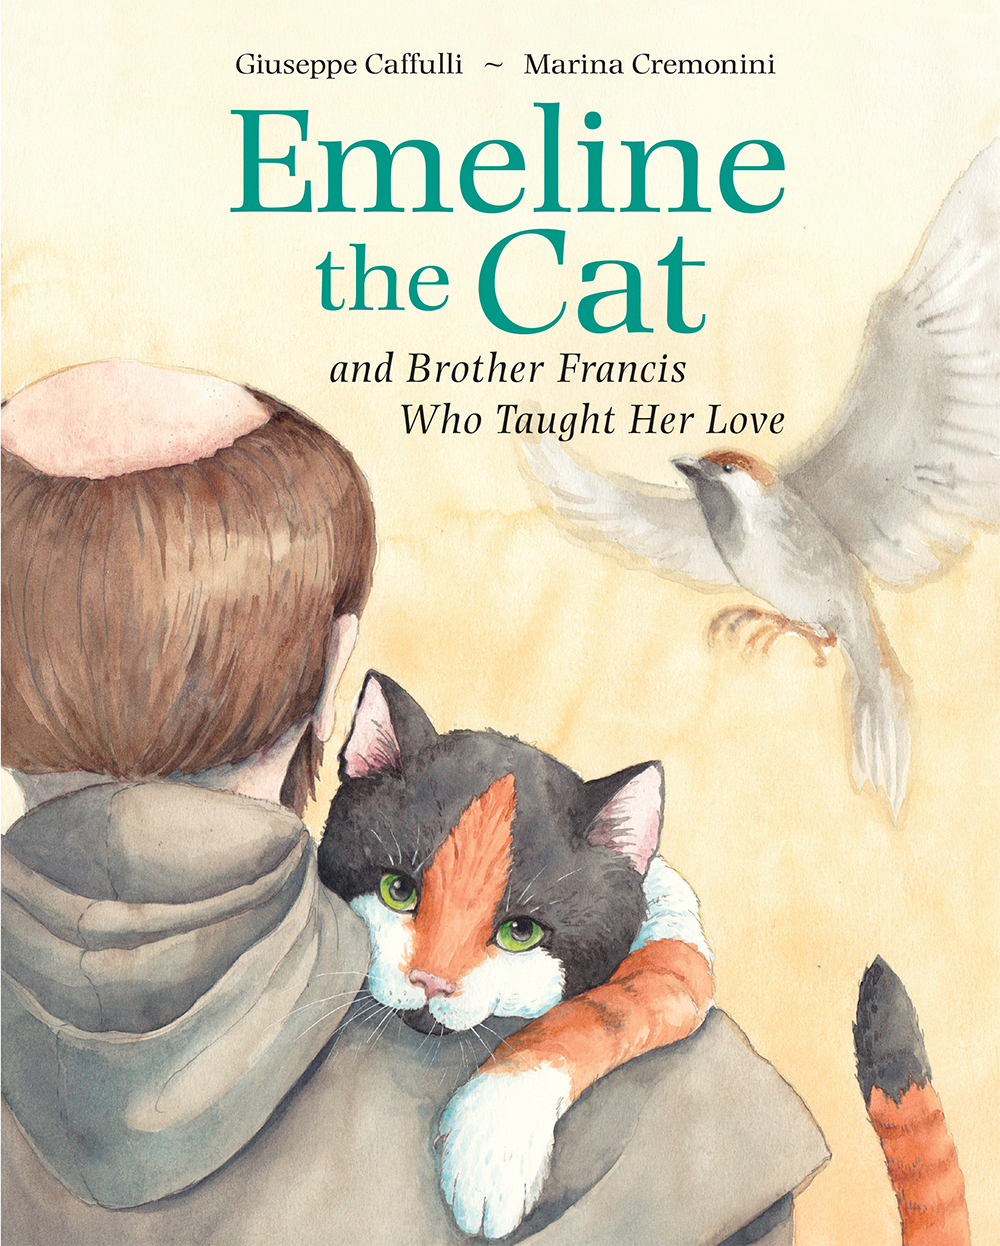 Emeline the Cat and Brother Francis Who Taught Her Love, Catholic book for children about Brother Francis